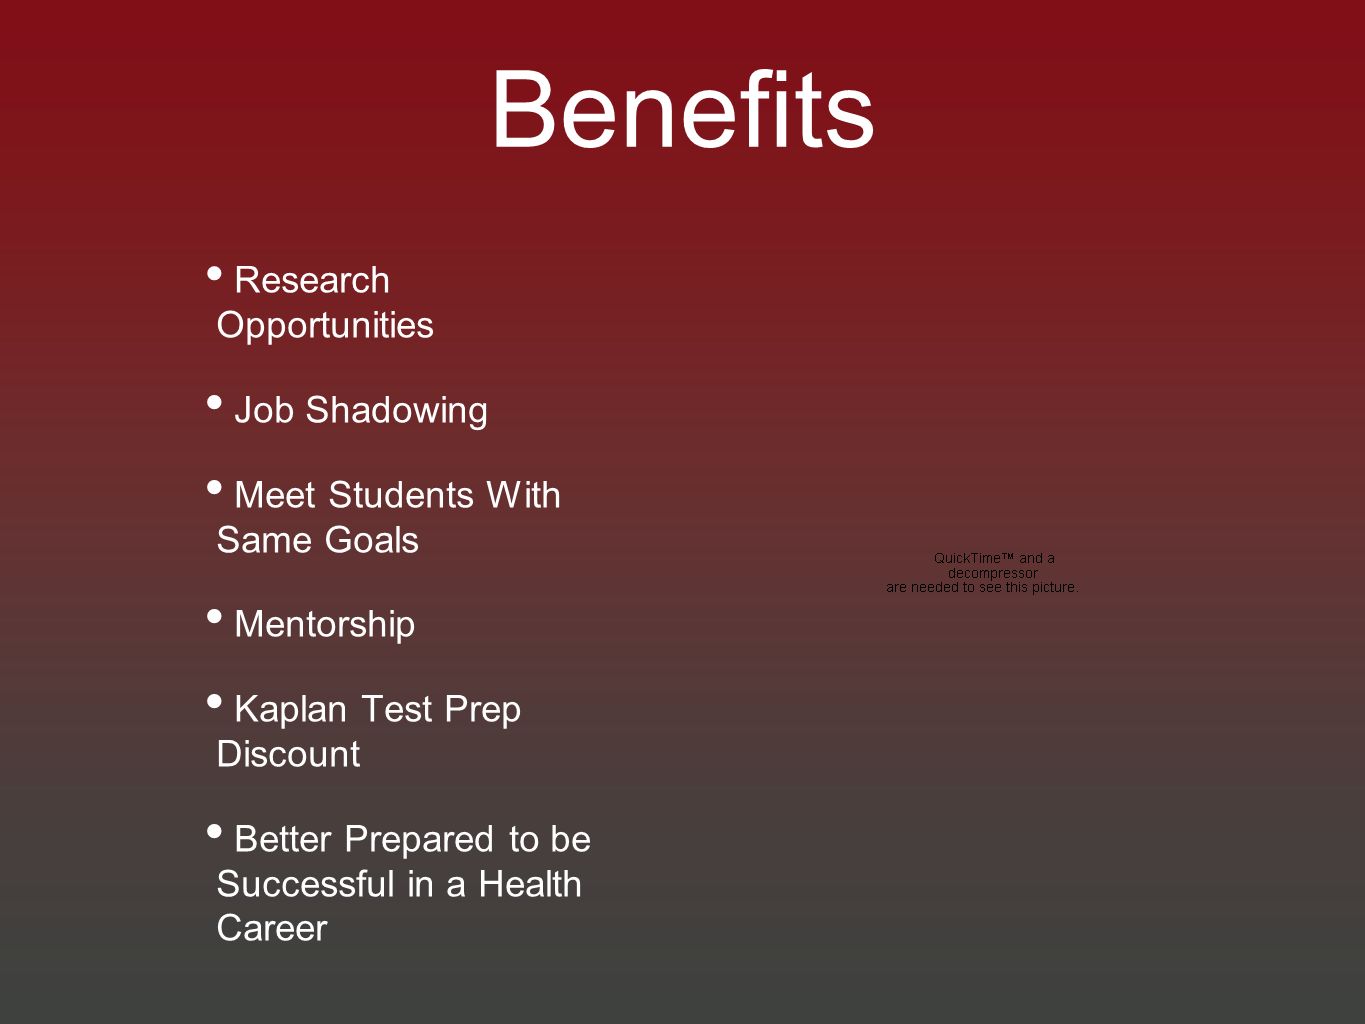 Benefits Research Opportunities Job Shadowing Meet Students With Same Goals Mentorship Kaplan Test Prep Discount Better Prepared to be Successful in a Health Career